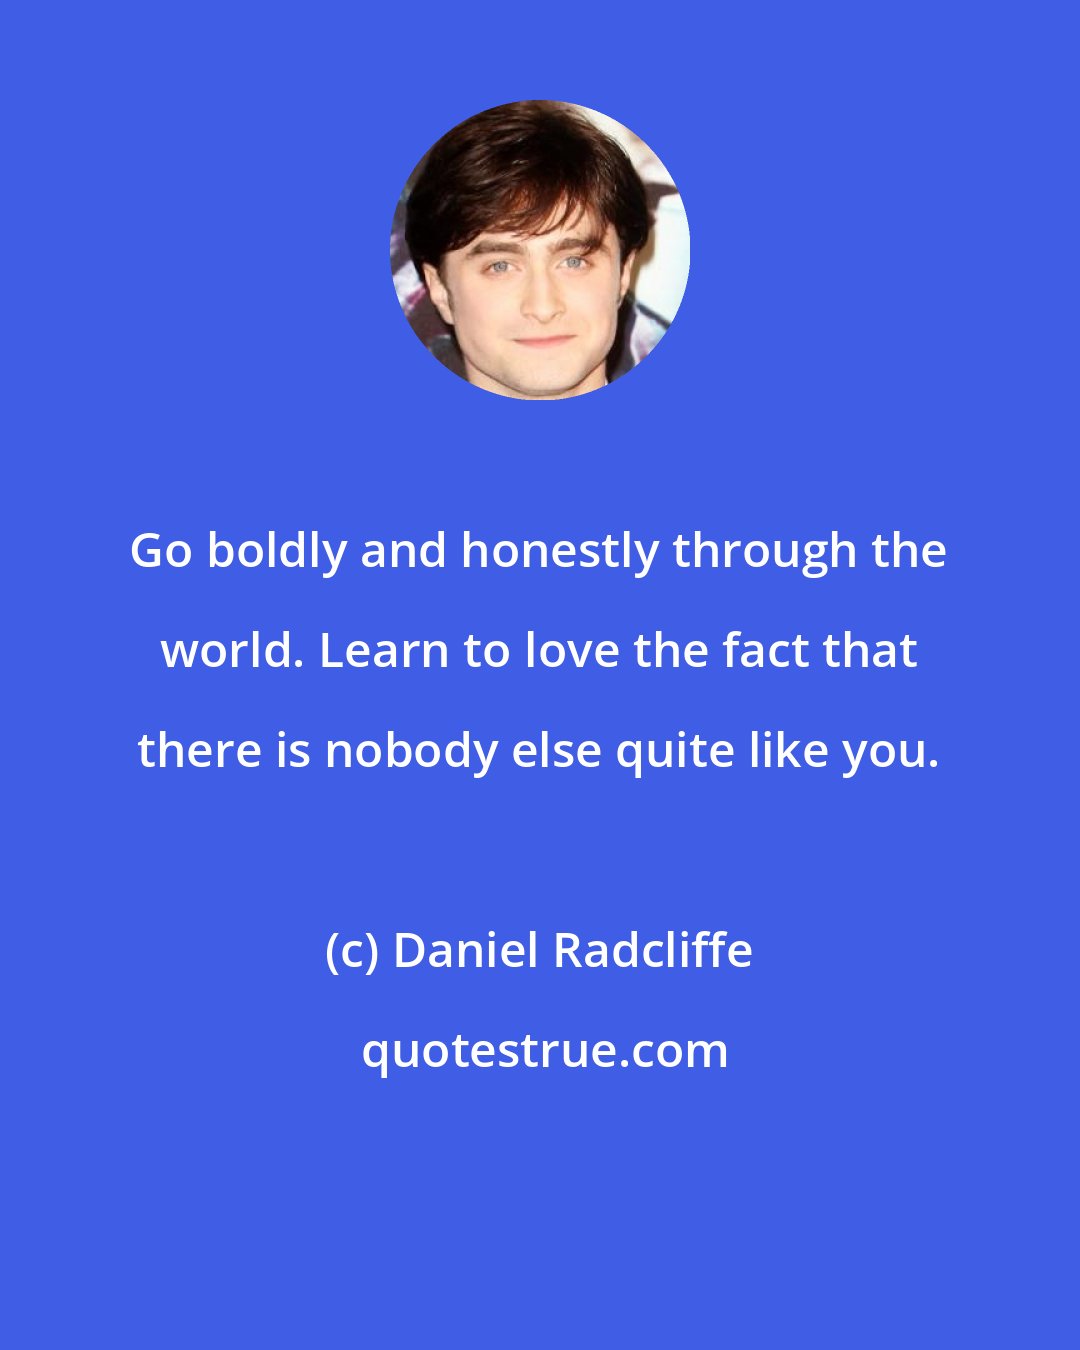 Daniel Radcliffe: Go boldly and honestly through the world. Learn to love the fact that there is nobody else quite like you.